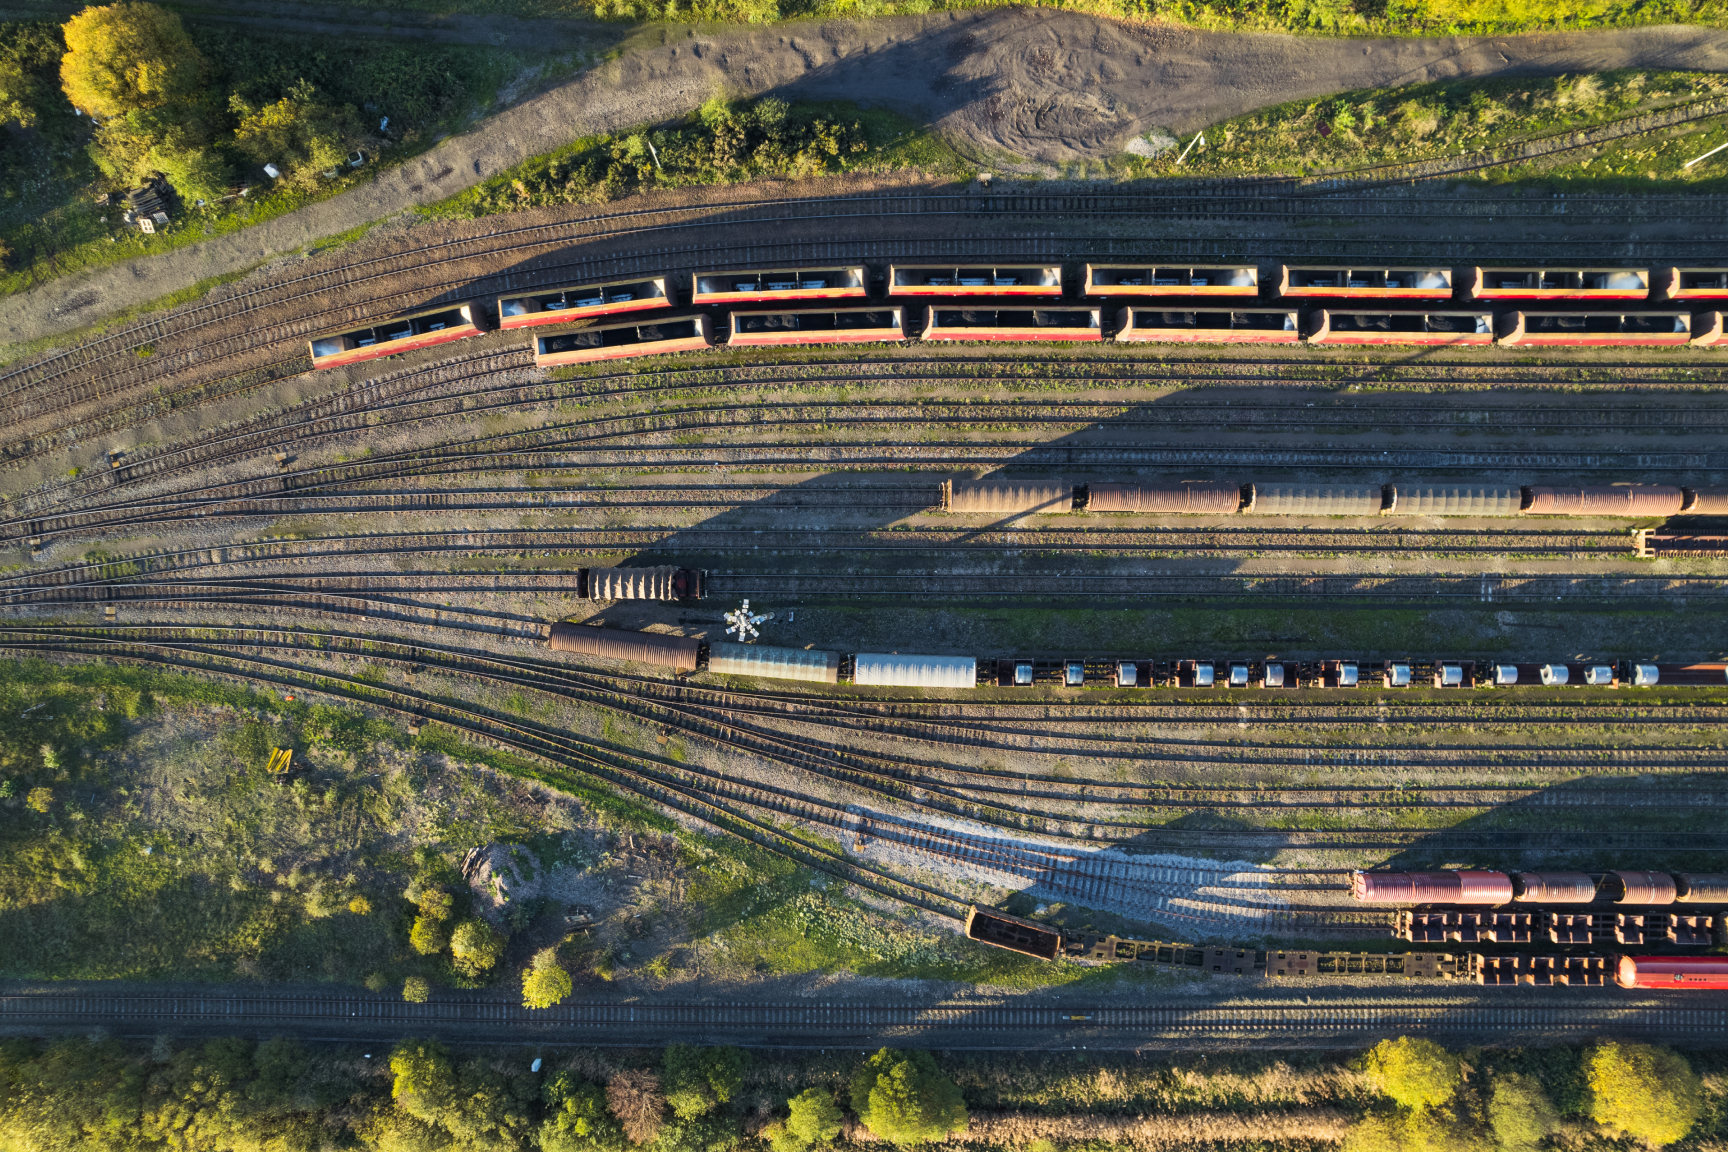 Aerial shot of freight yard with train carriages 